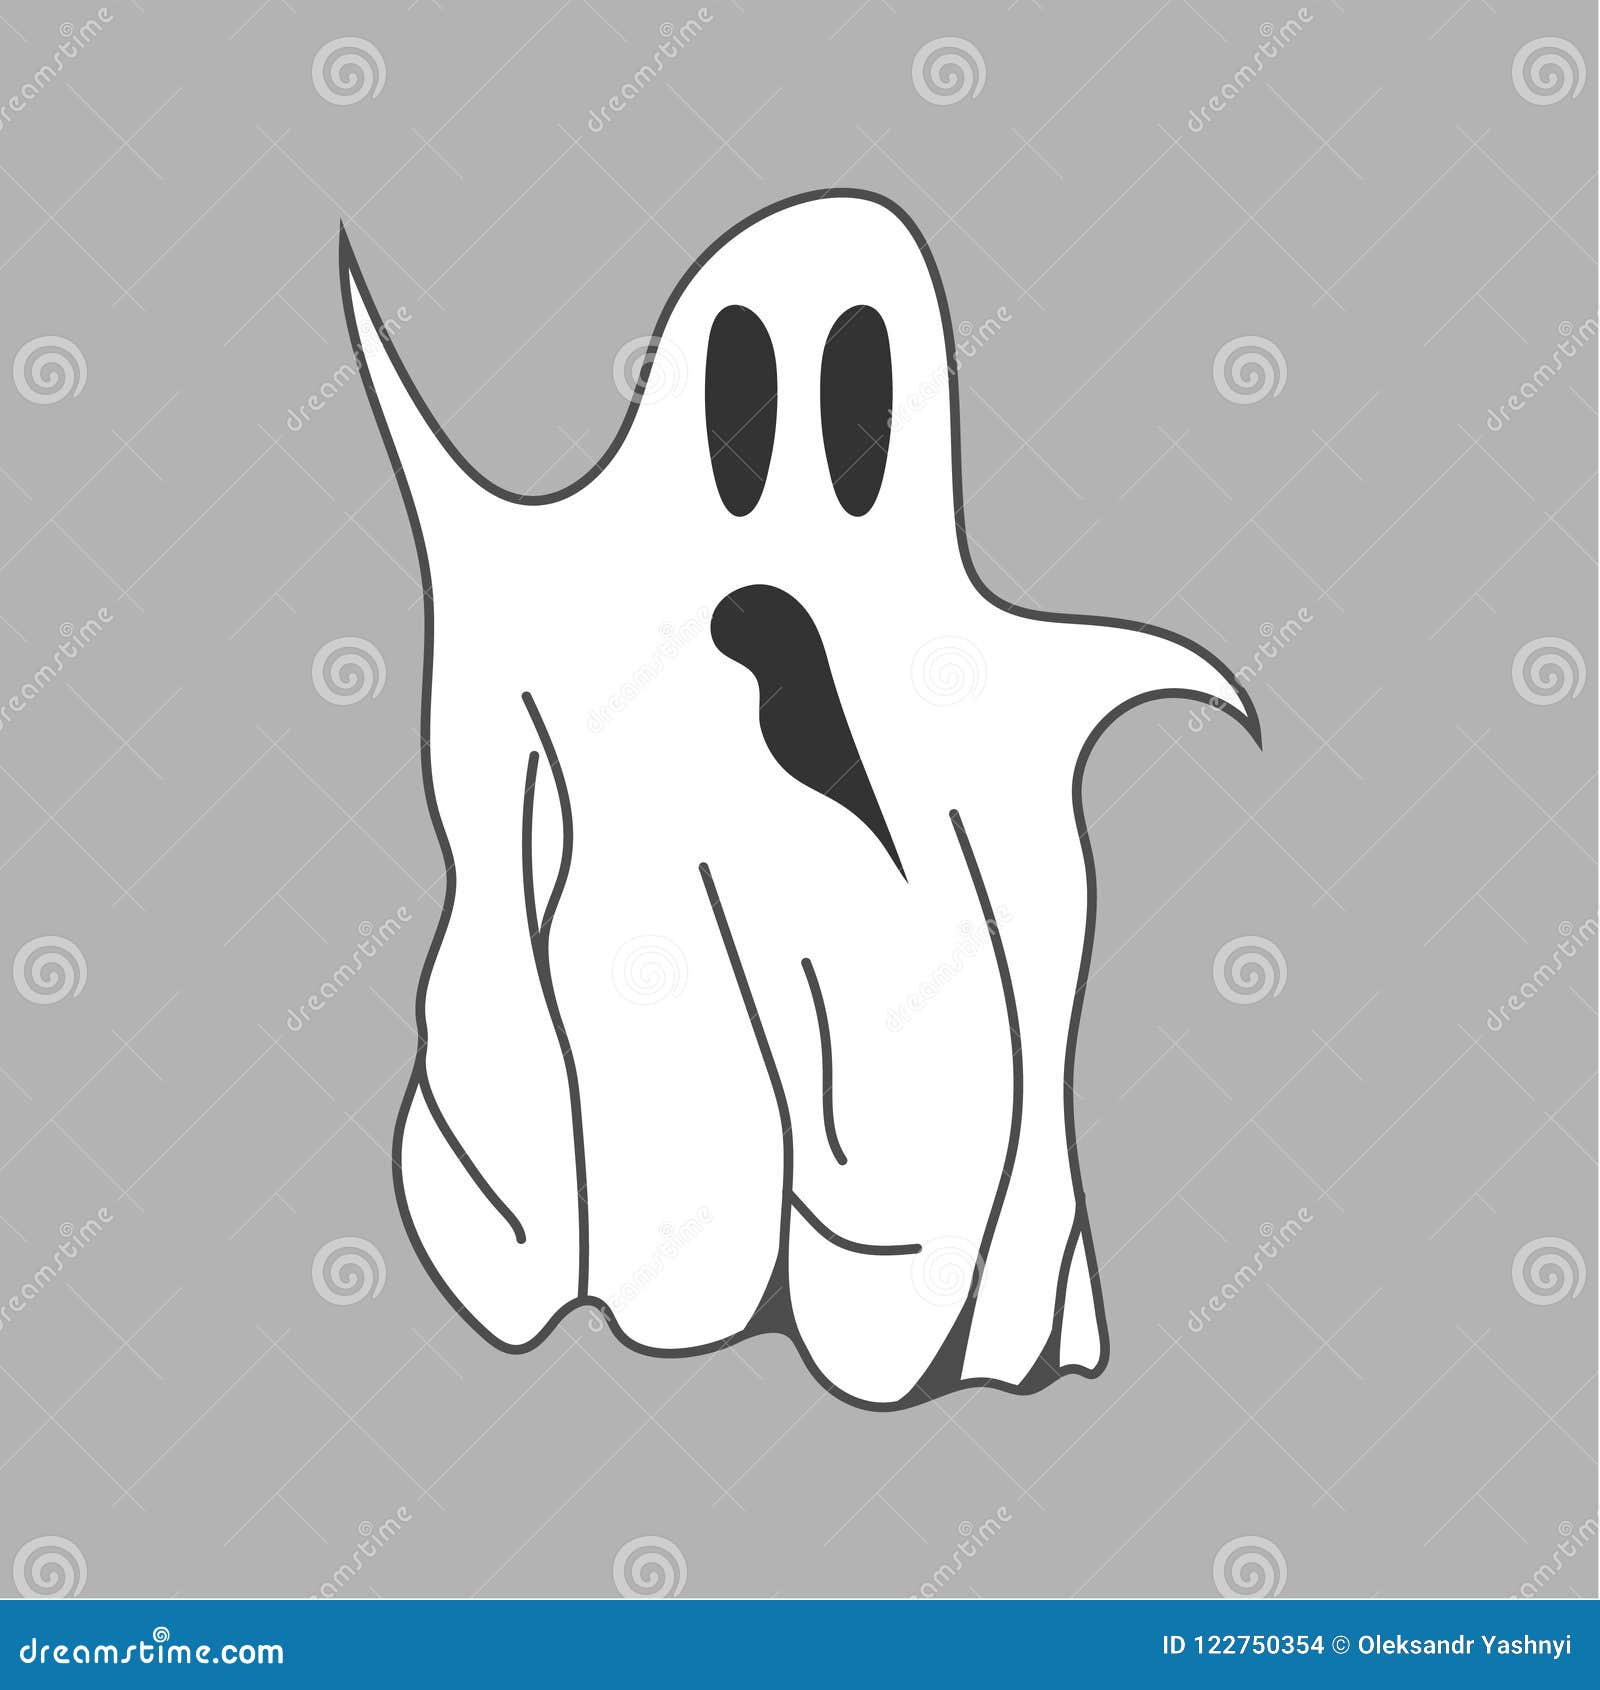 Cute Cartoon White Ghost Isolated on Grey Background. Vector Illustration  for Your Design, Game,Card. Stock Vector - Illustration of black,  character: 122750354